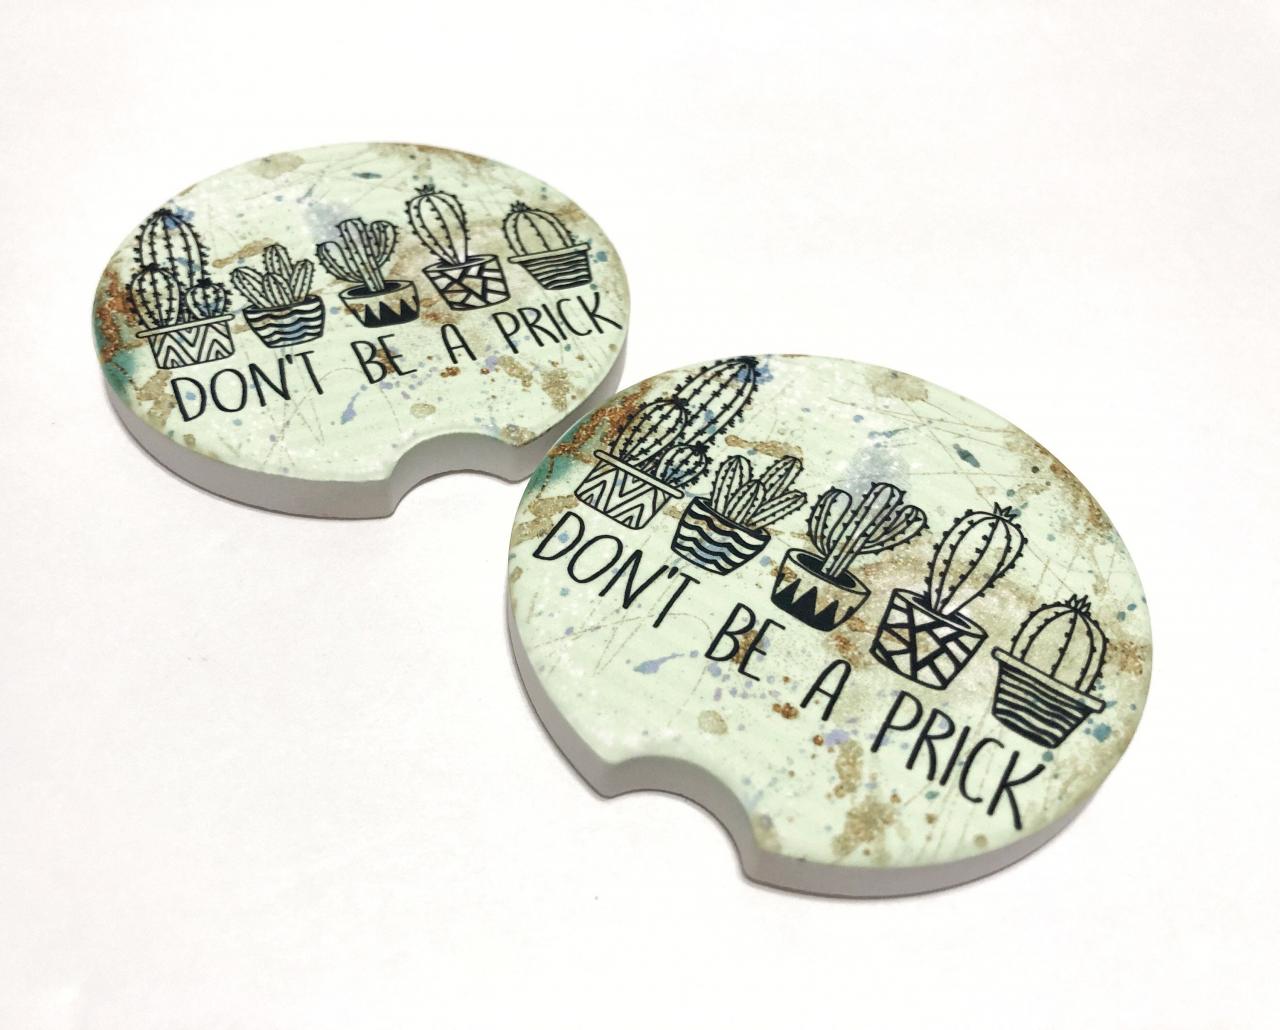 Don't Be A Prick, Car Coasters, Cactus, Cacti, Funny Coasters, Set Of 2, Sandstone, Fits Most Vehicles